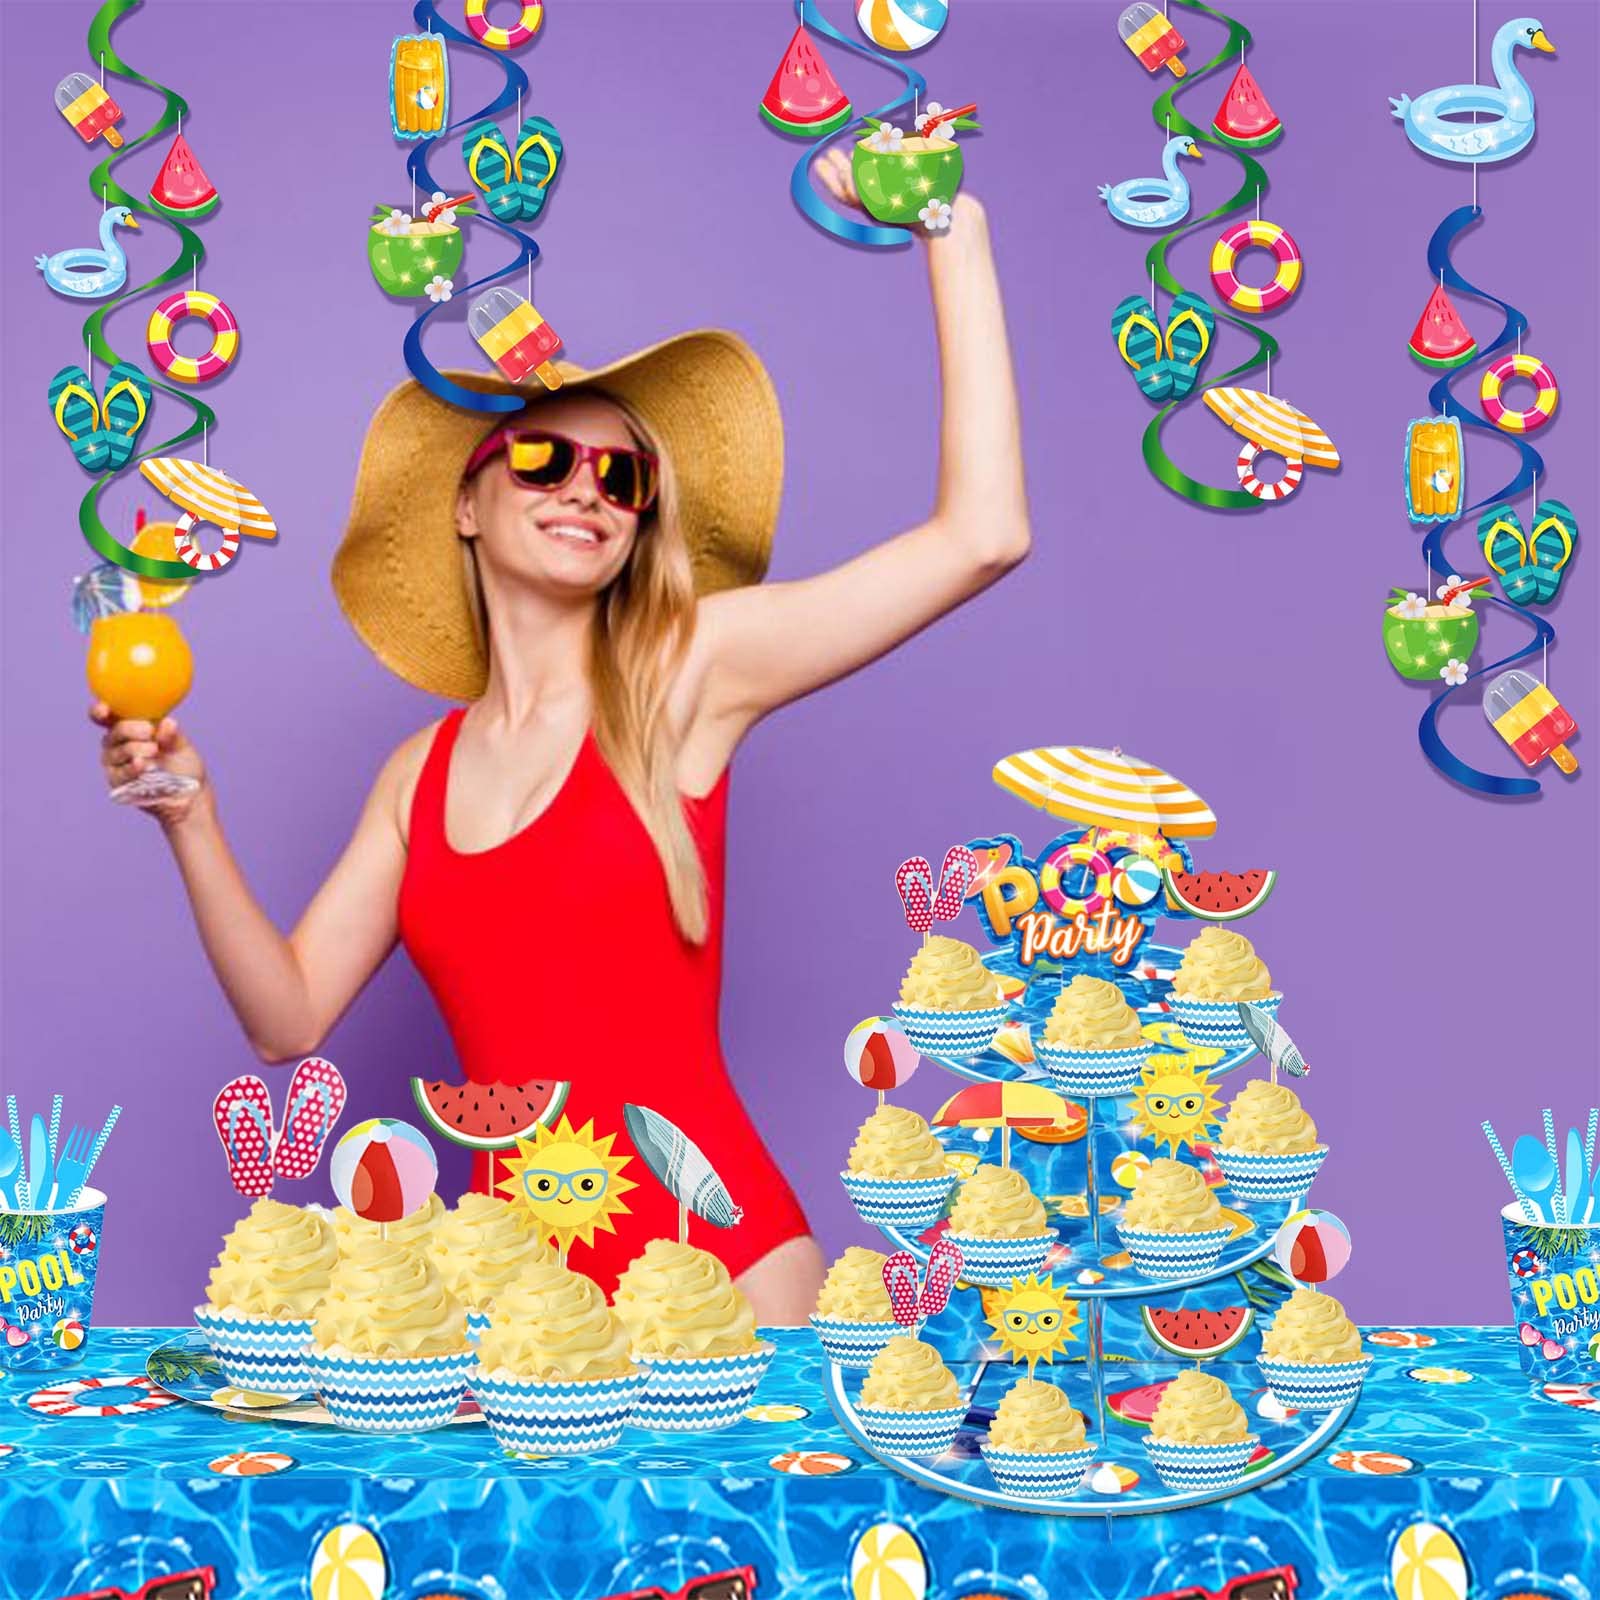 25 PCs Pool Cupcake Stand 3-Tier and Pool Cupcake Topper Set, Fiesec Pool Theme Summer Beach Ball Swimming Hawaii Party Supplies Cardboard Dessert Tower Holder Round Serving Stand Holder